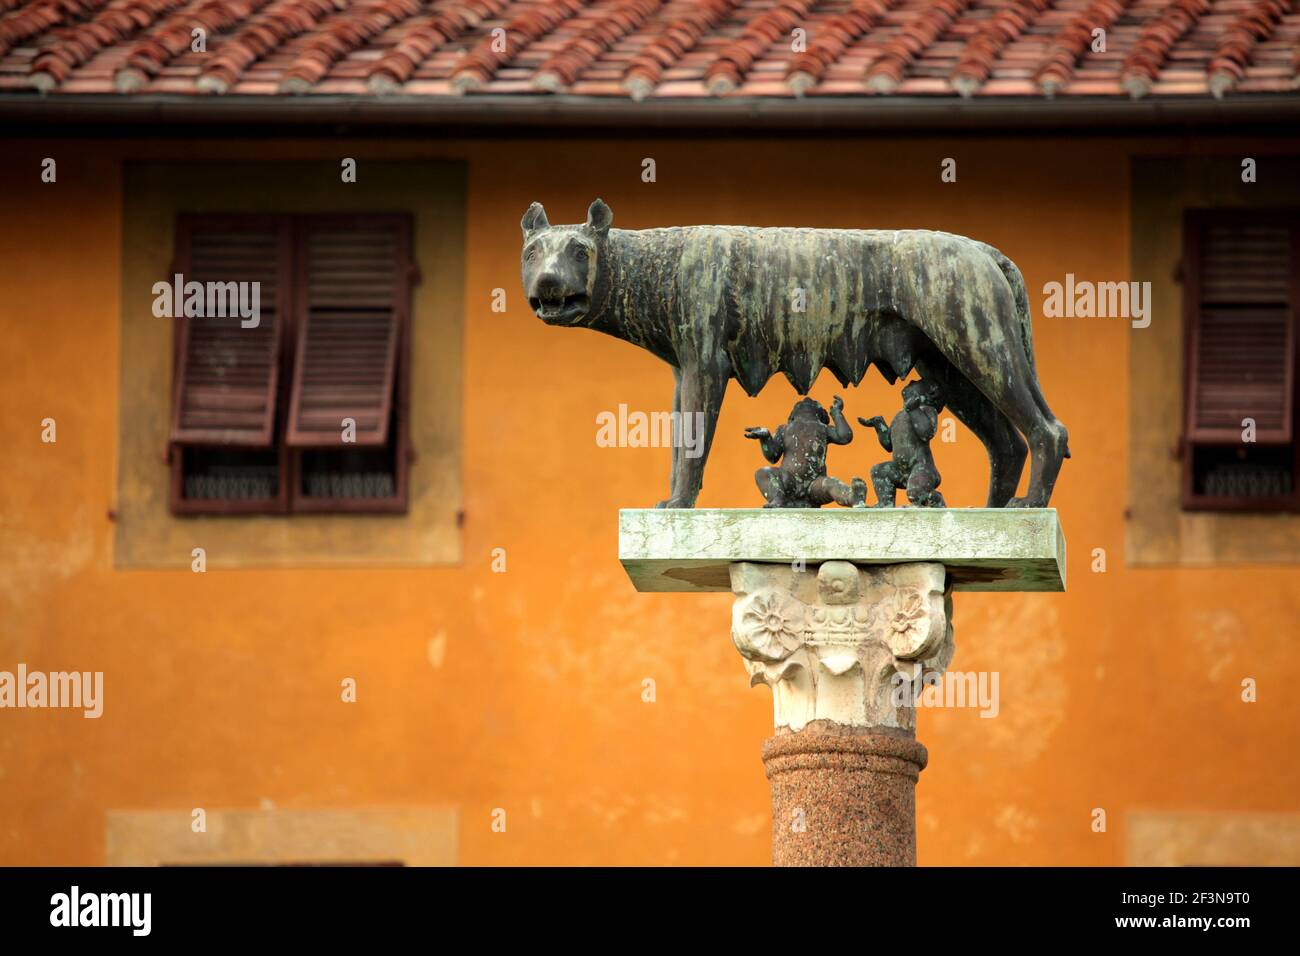 Statues showing the mythological origins of Roman society, in which a wolf suckles founders Romulus and Remus, stand in many Italian cities. Stock Photo